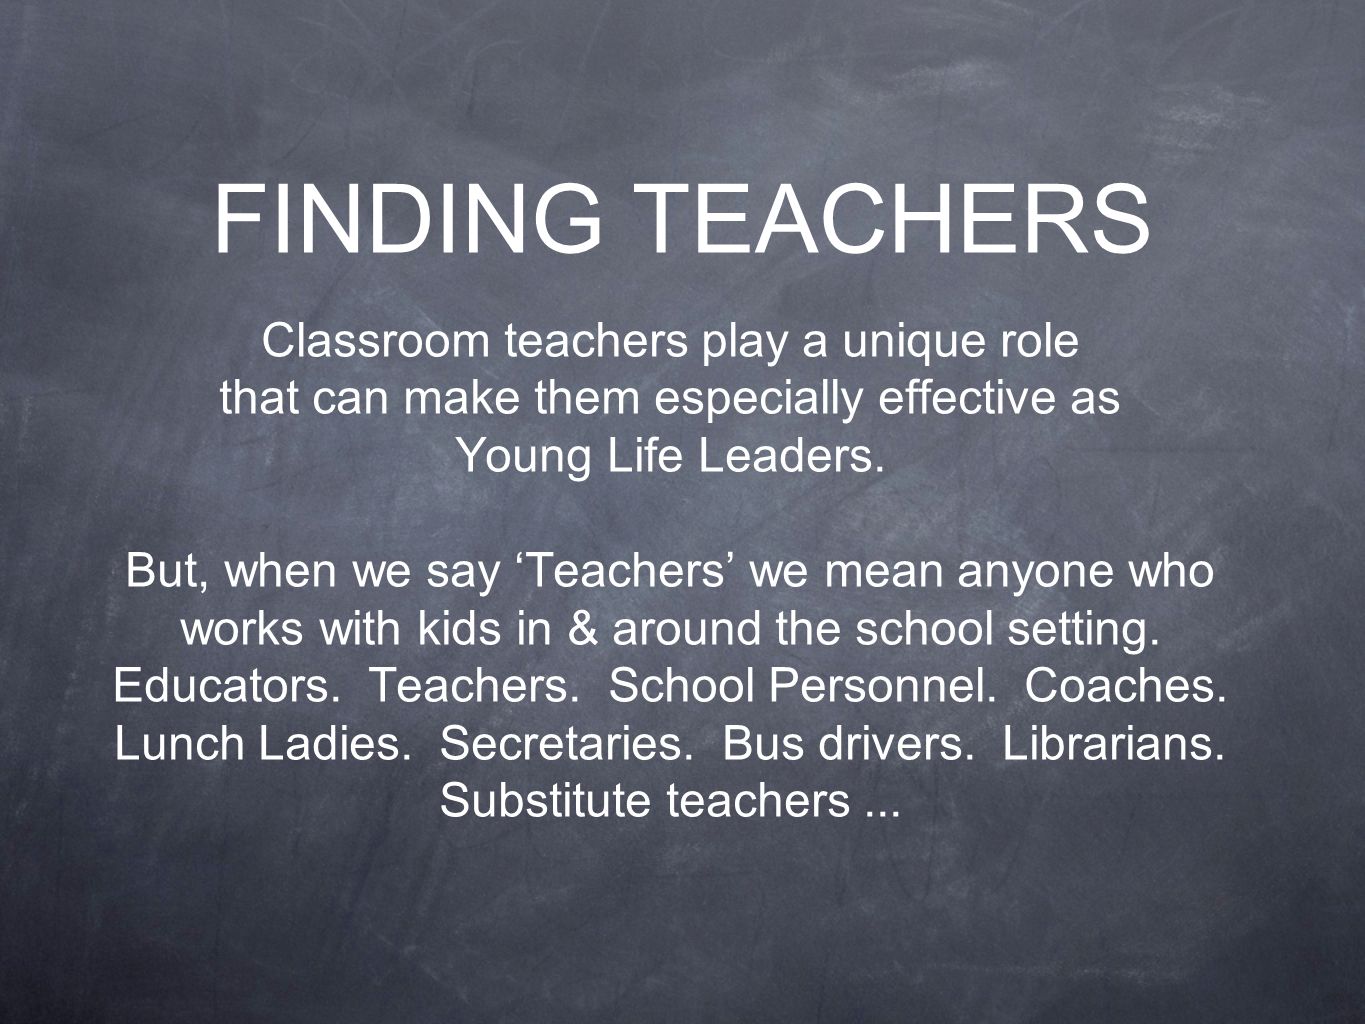 Classroom teachers play a unique role that can make them especially effective as Young Life Leaders.